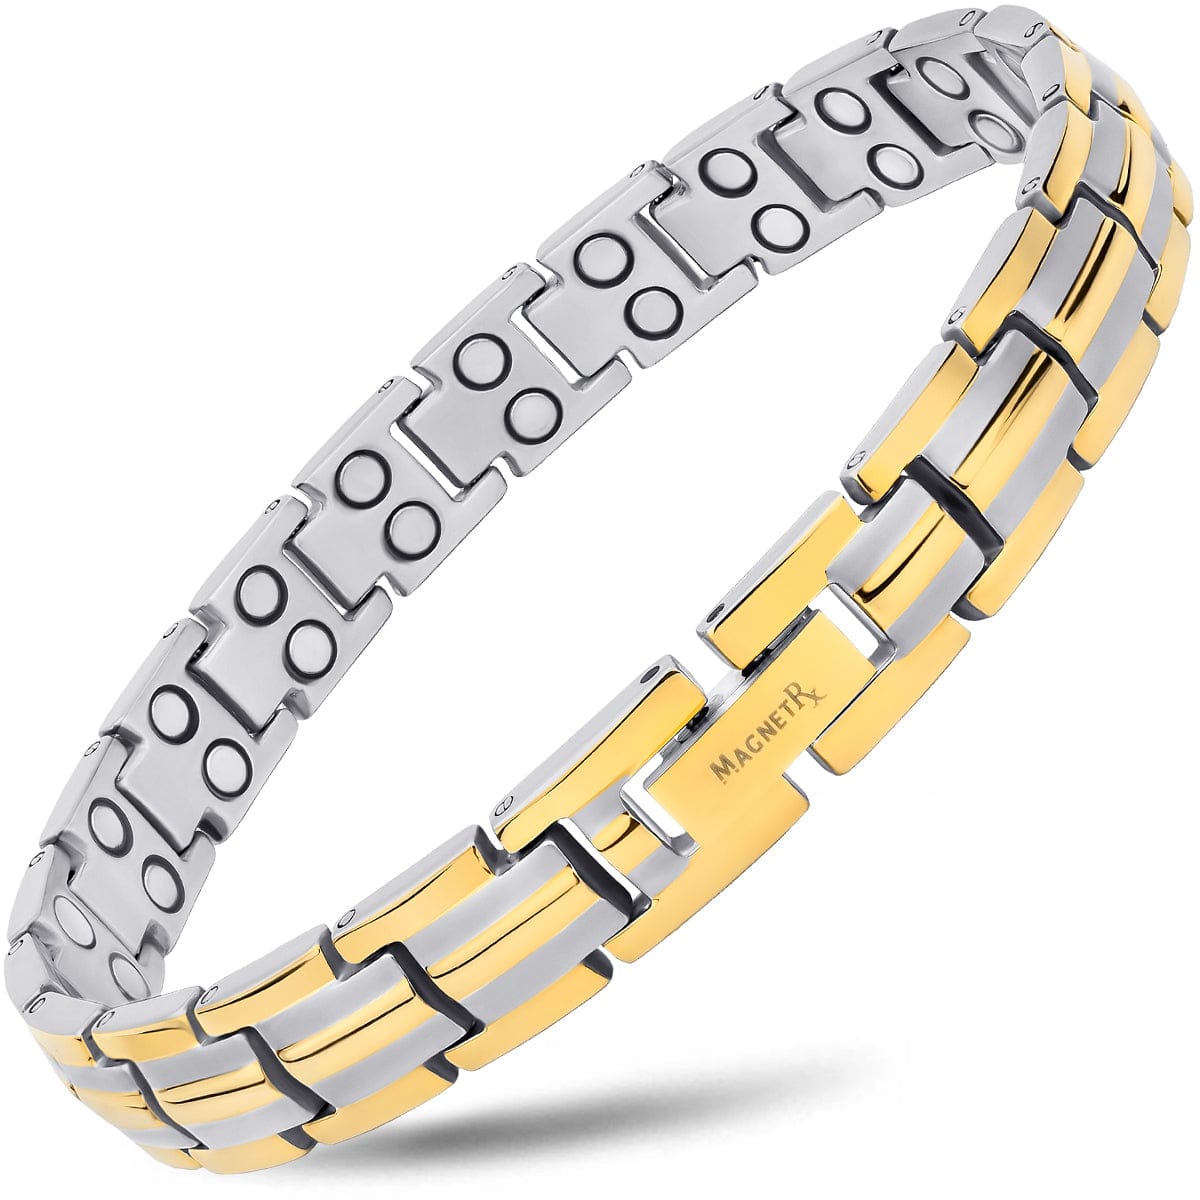 Sabona Buy Trio Cable StainlessGold Magnetic Bracelet at Ubuy India